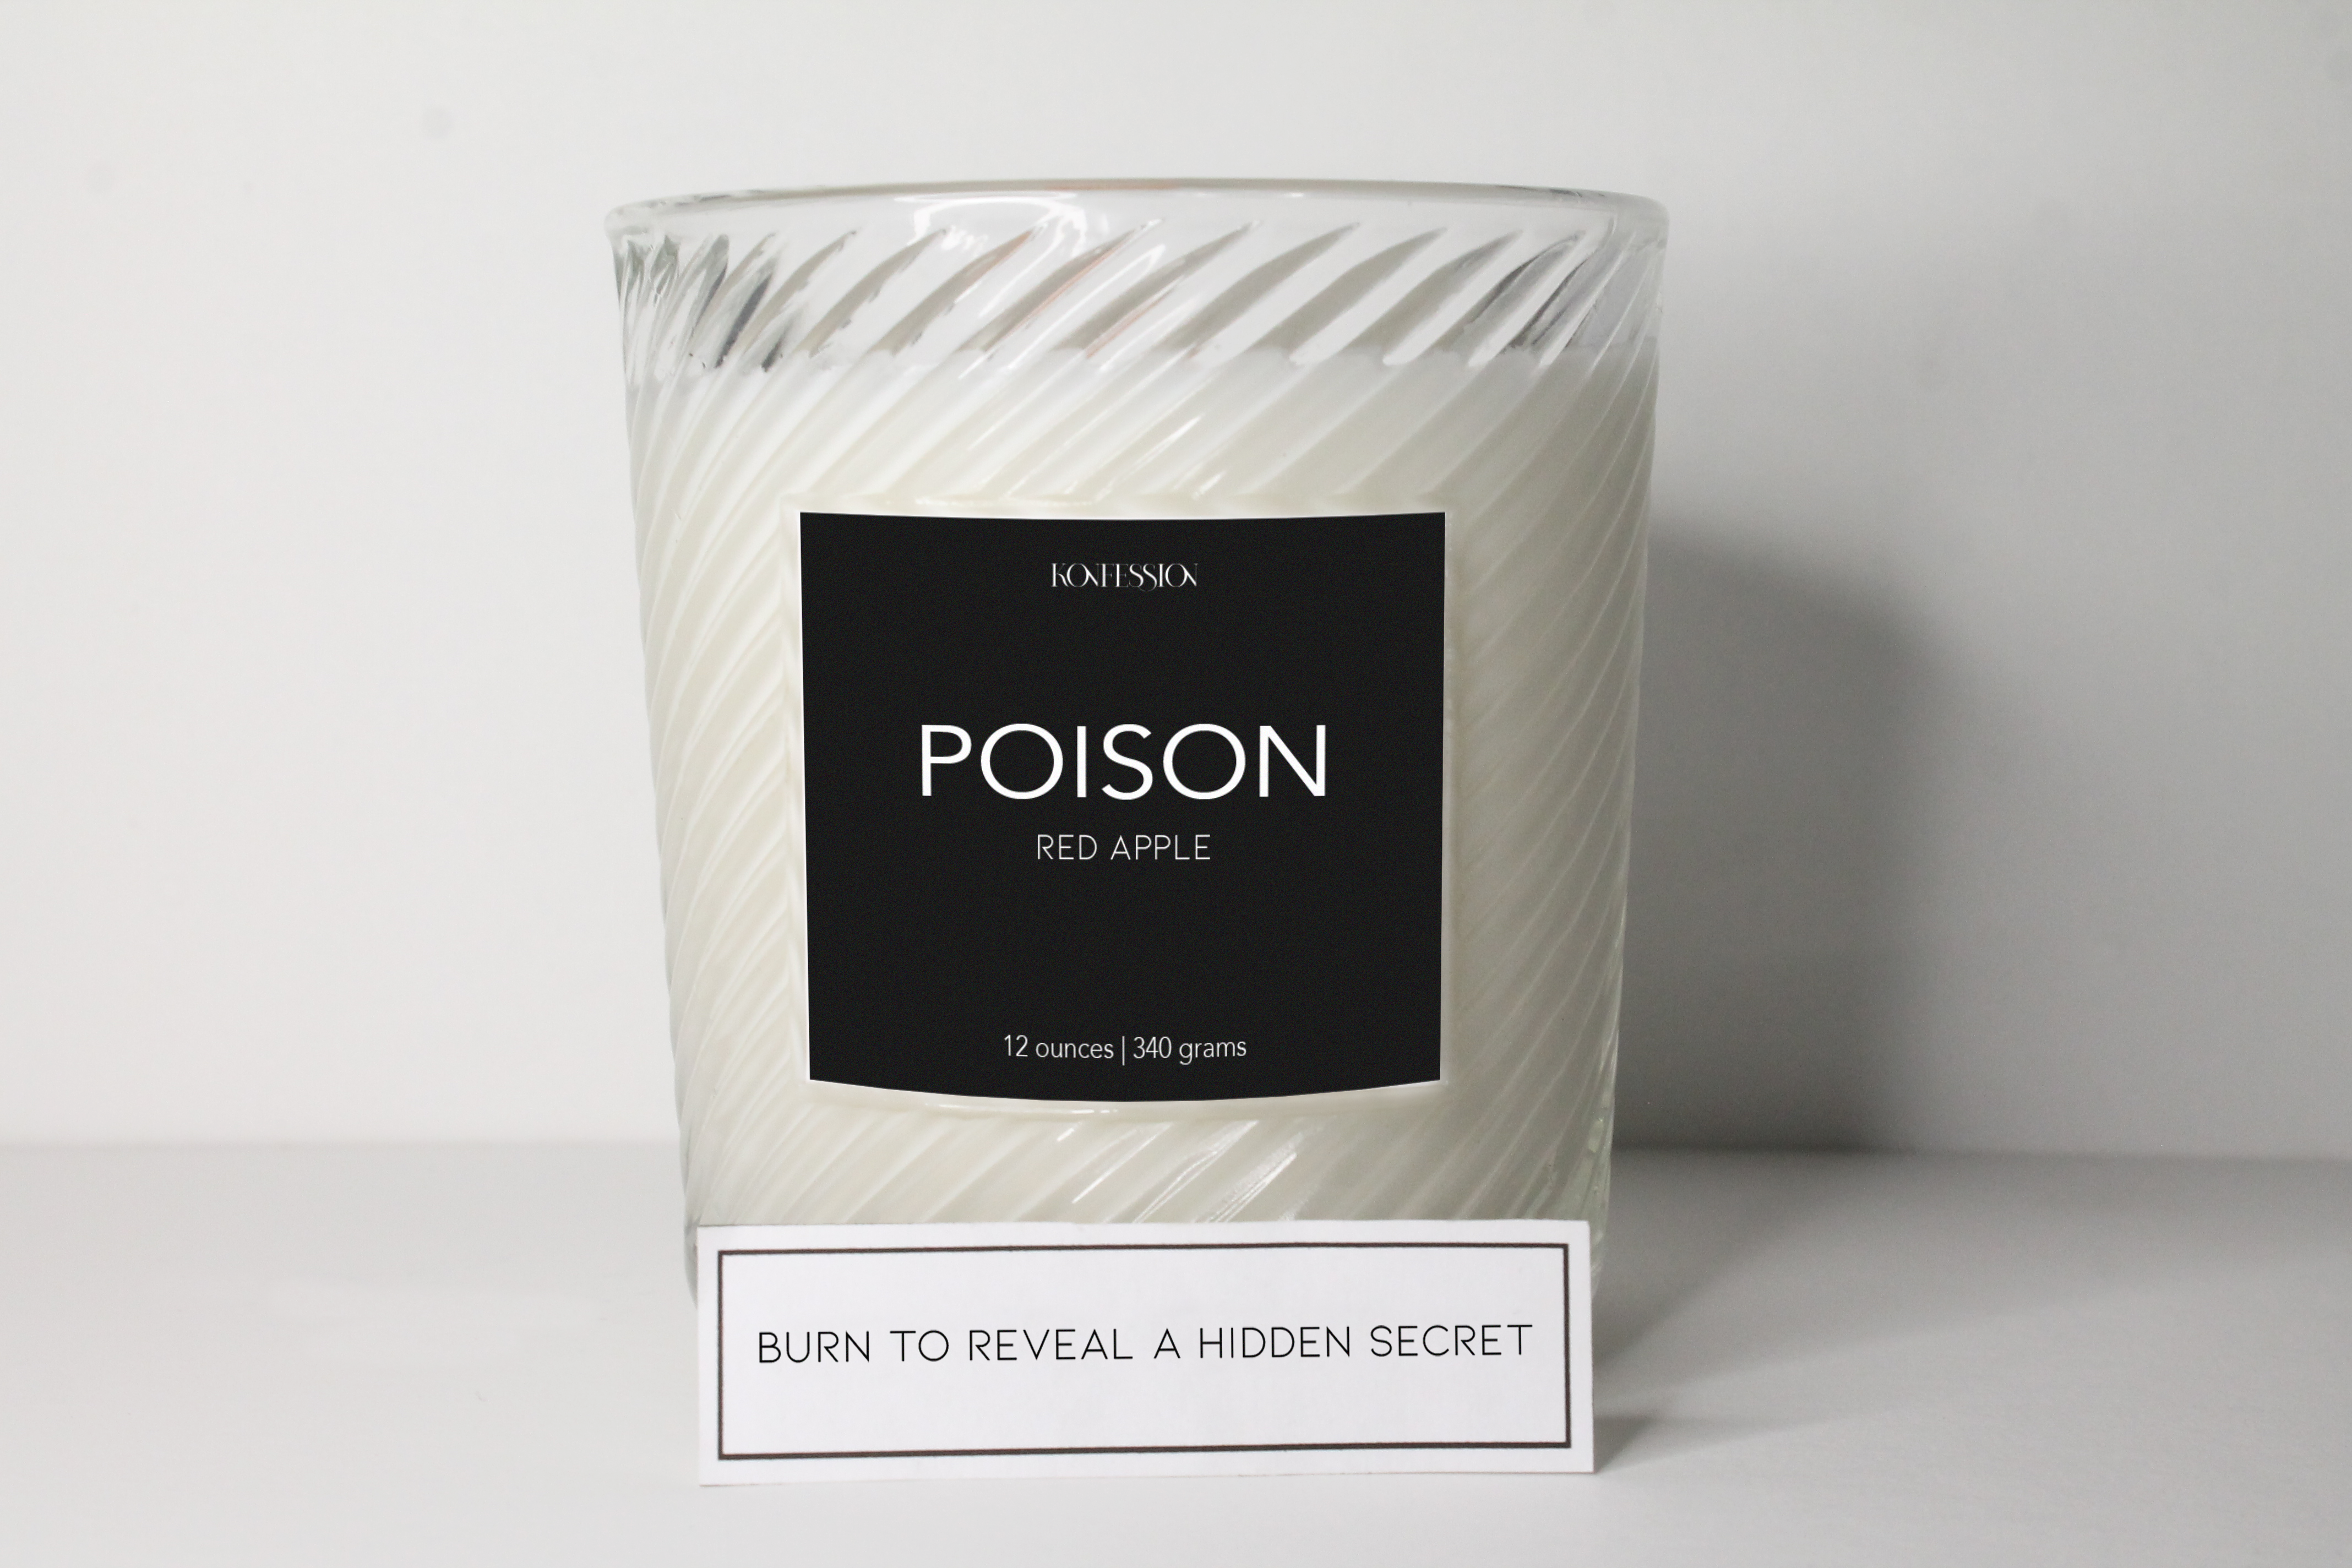 Each candle comes with a hidden confession that is sent in anonymously from a stranger. Burn to reveal a hidden secret. 